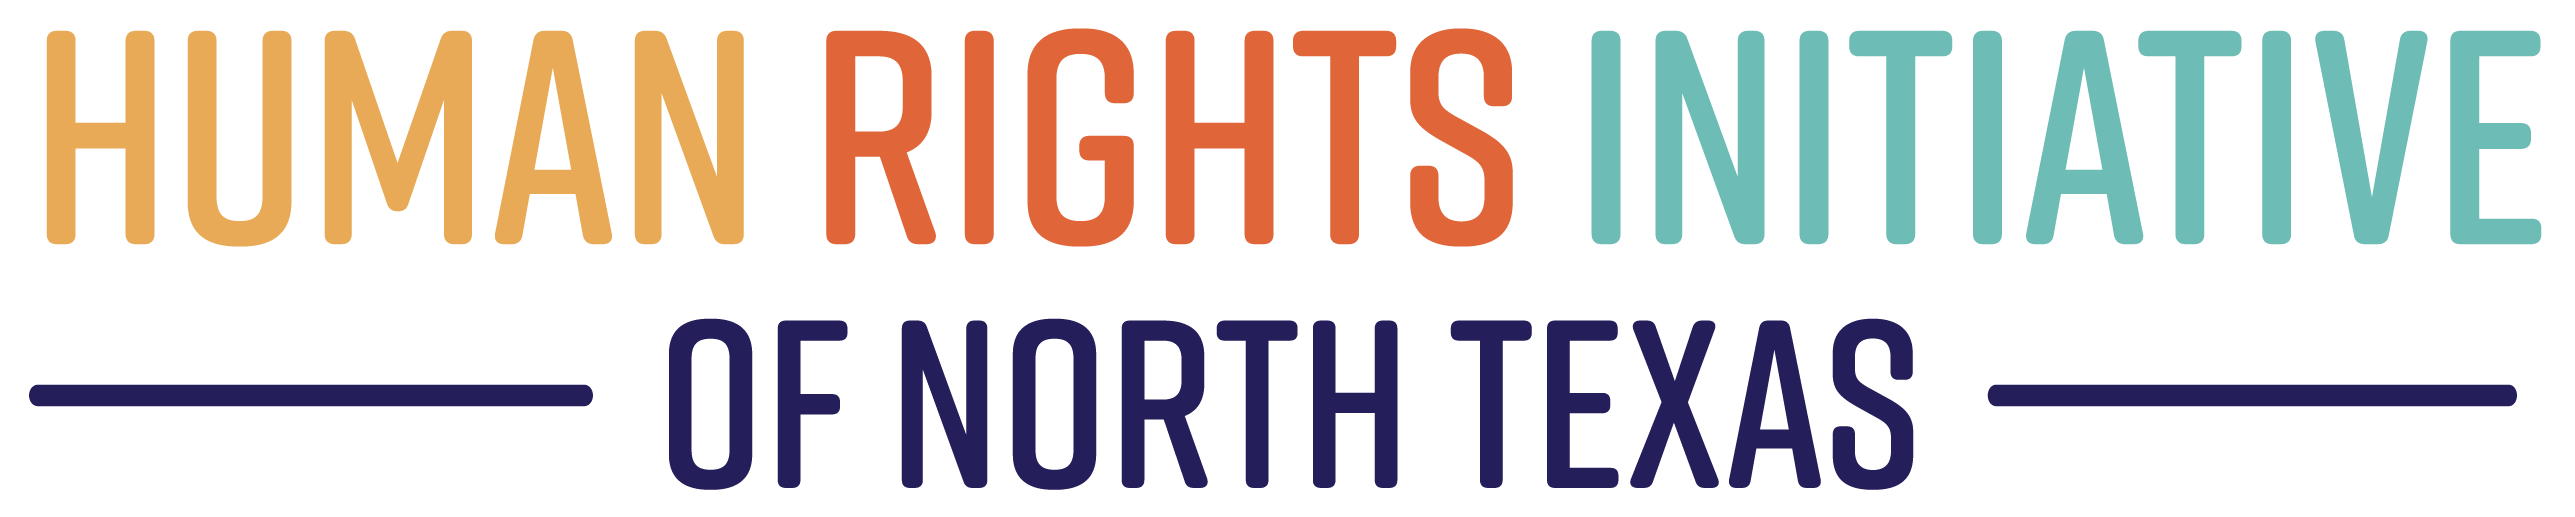 Human Rights Initiative of North Texas